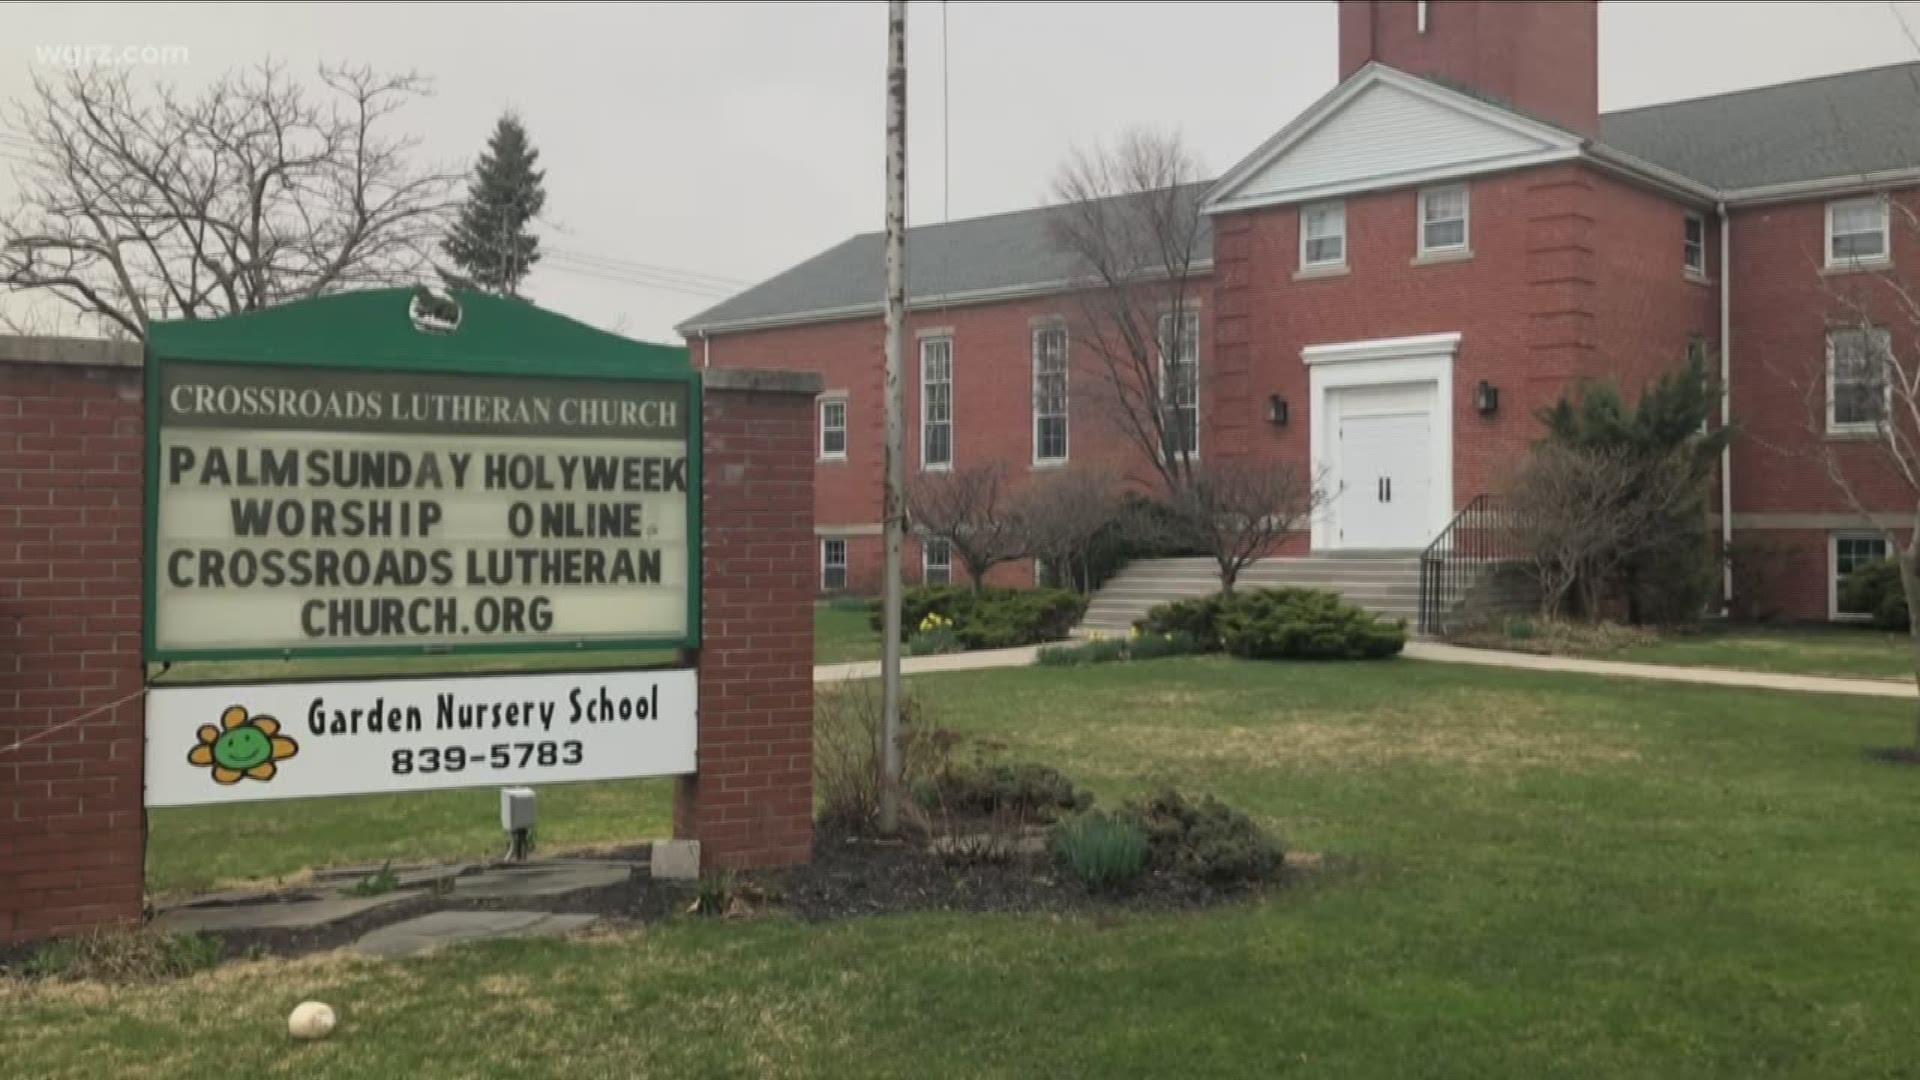 Tomorrow is the start of holy week for Christians around Western New York. With masses canceled until further notice, they'll be celebrating separately this year.